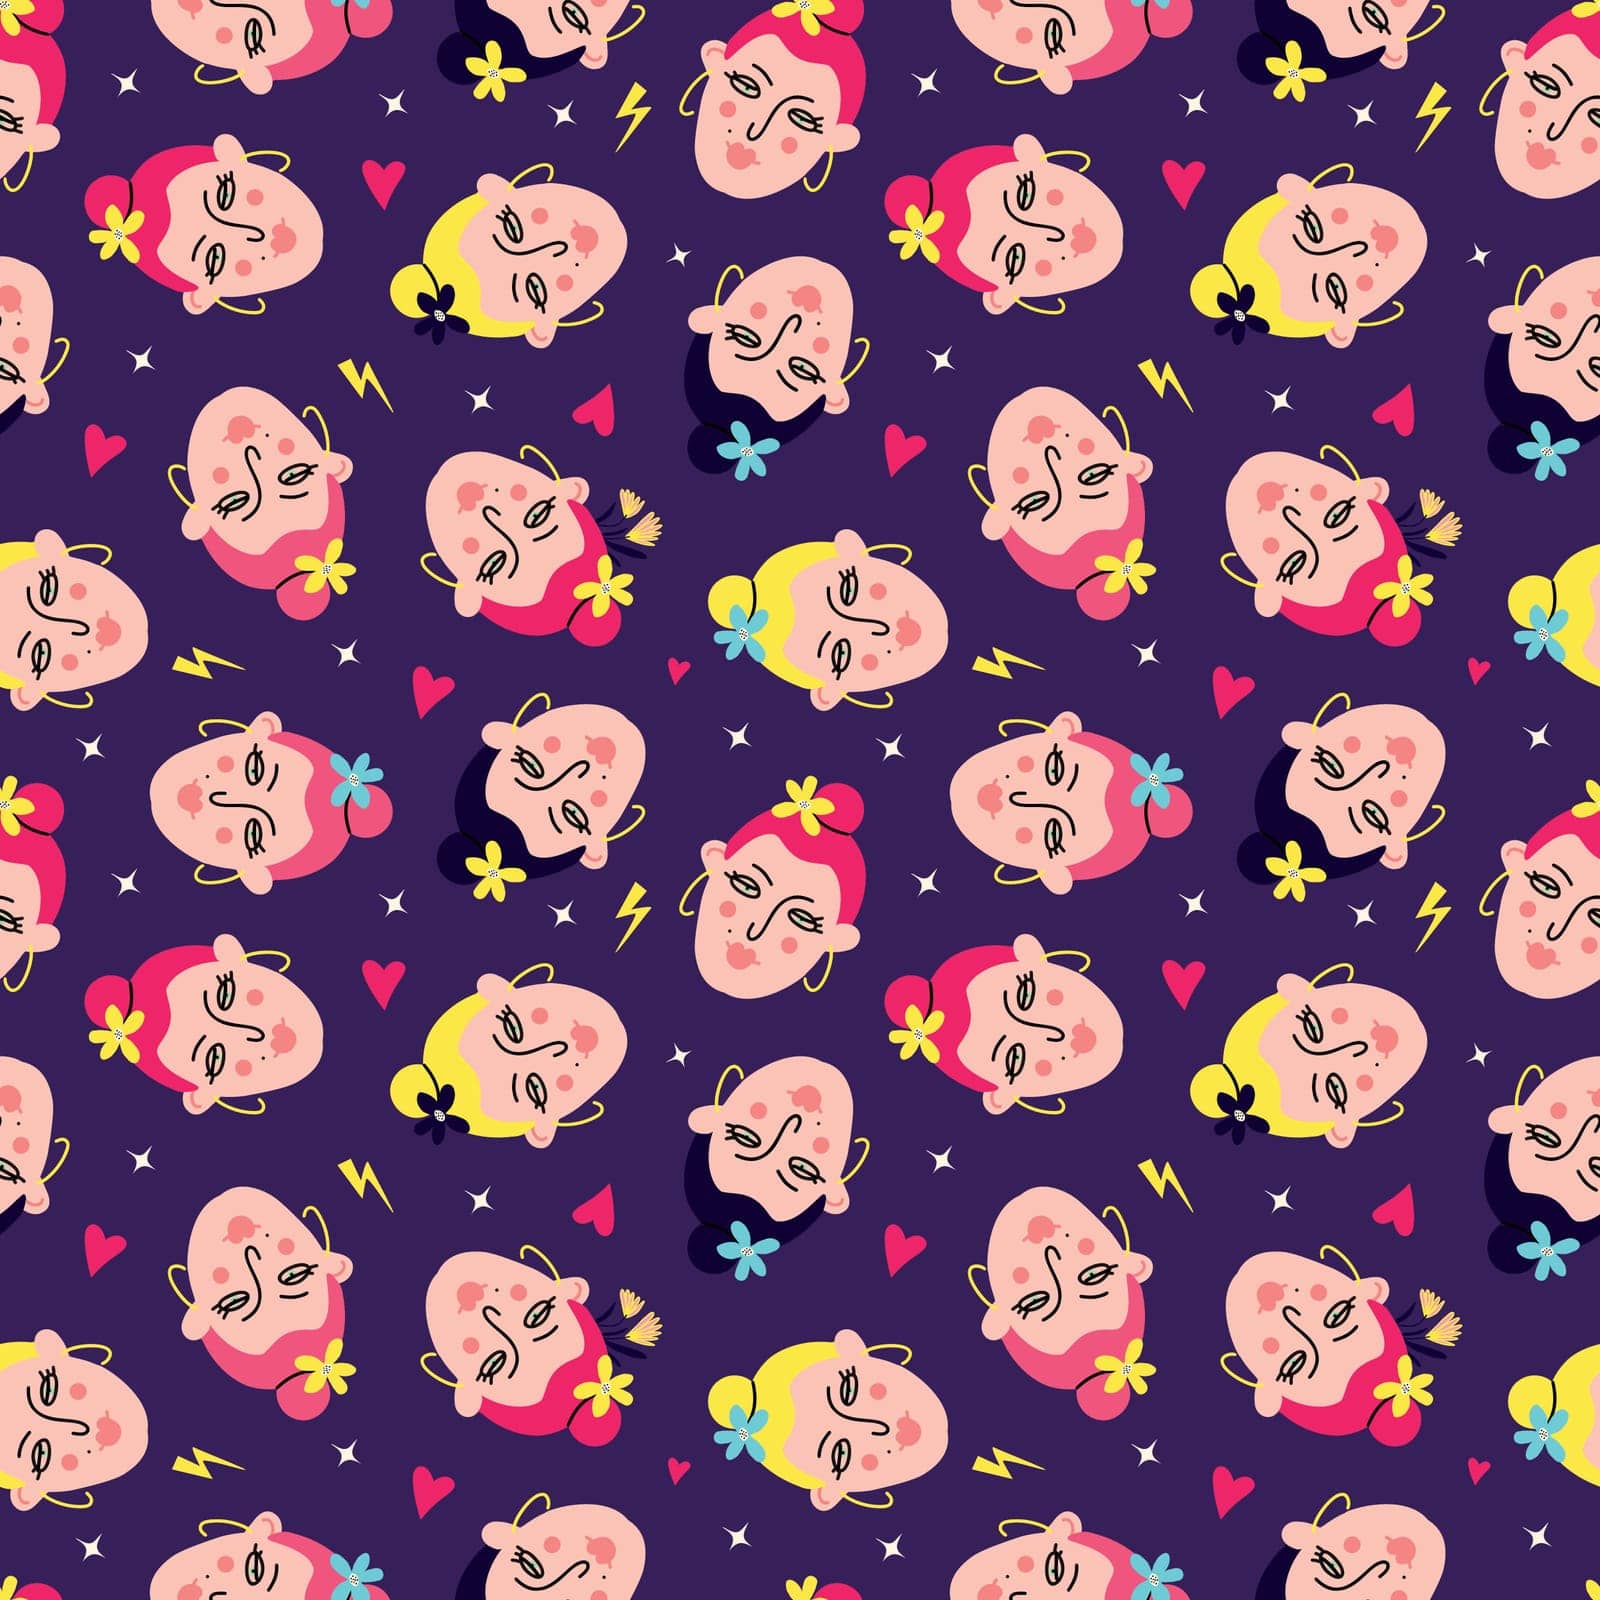 Pink vibrant pattern with comical funny girly faces, by Dustick